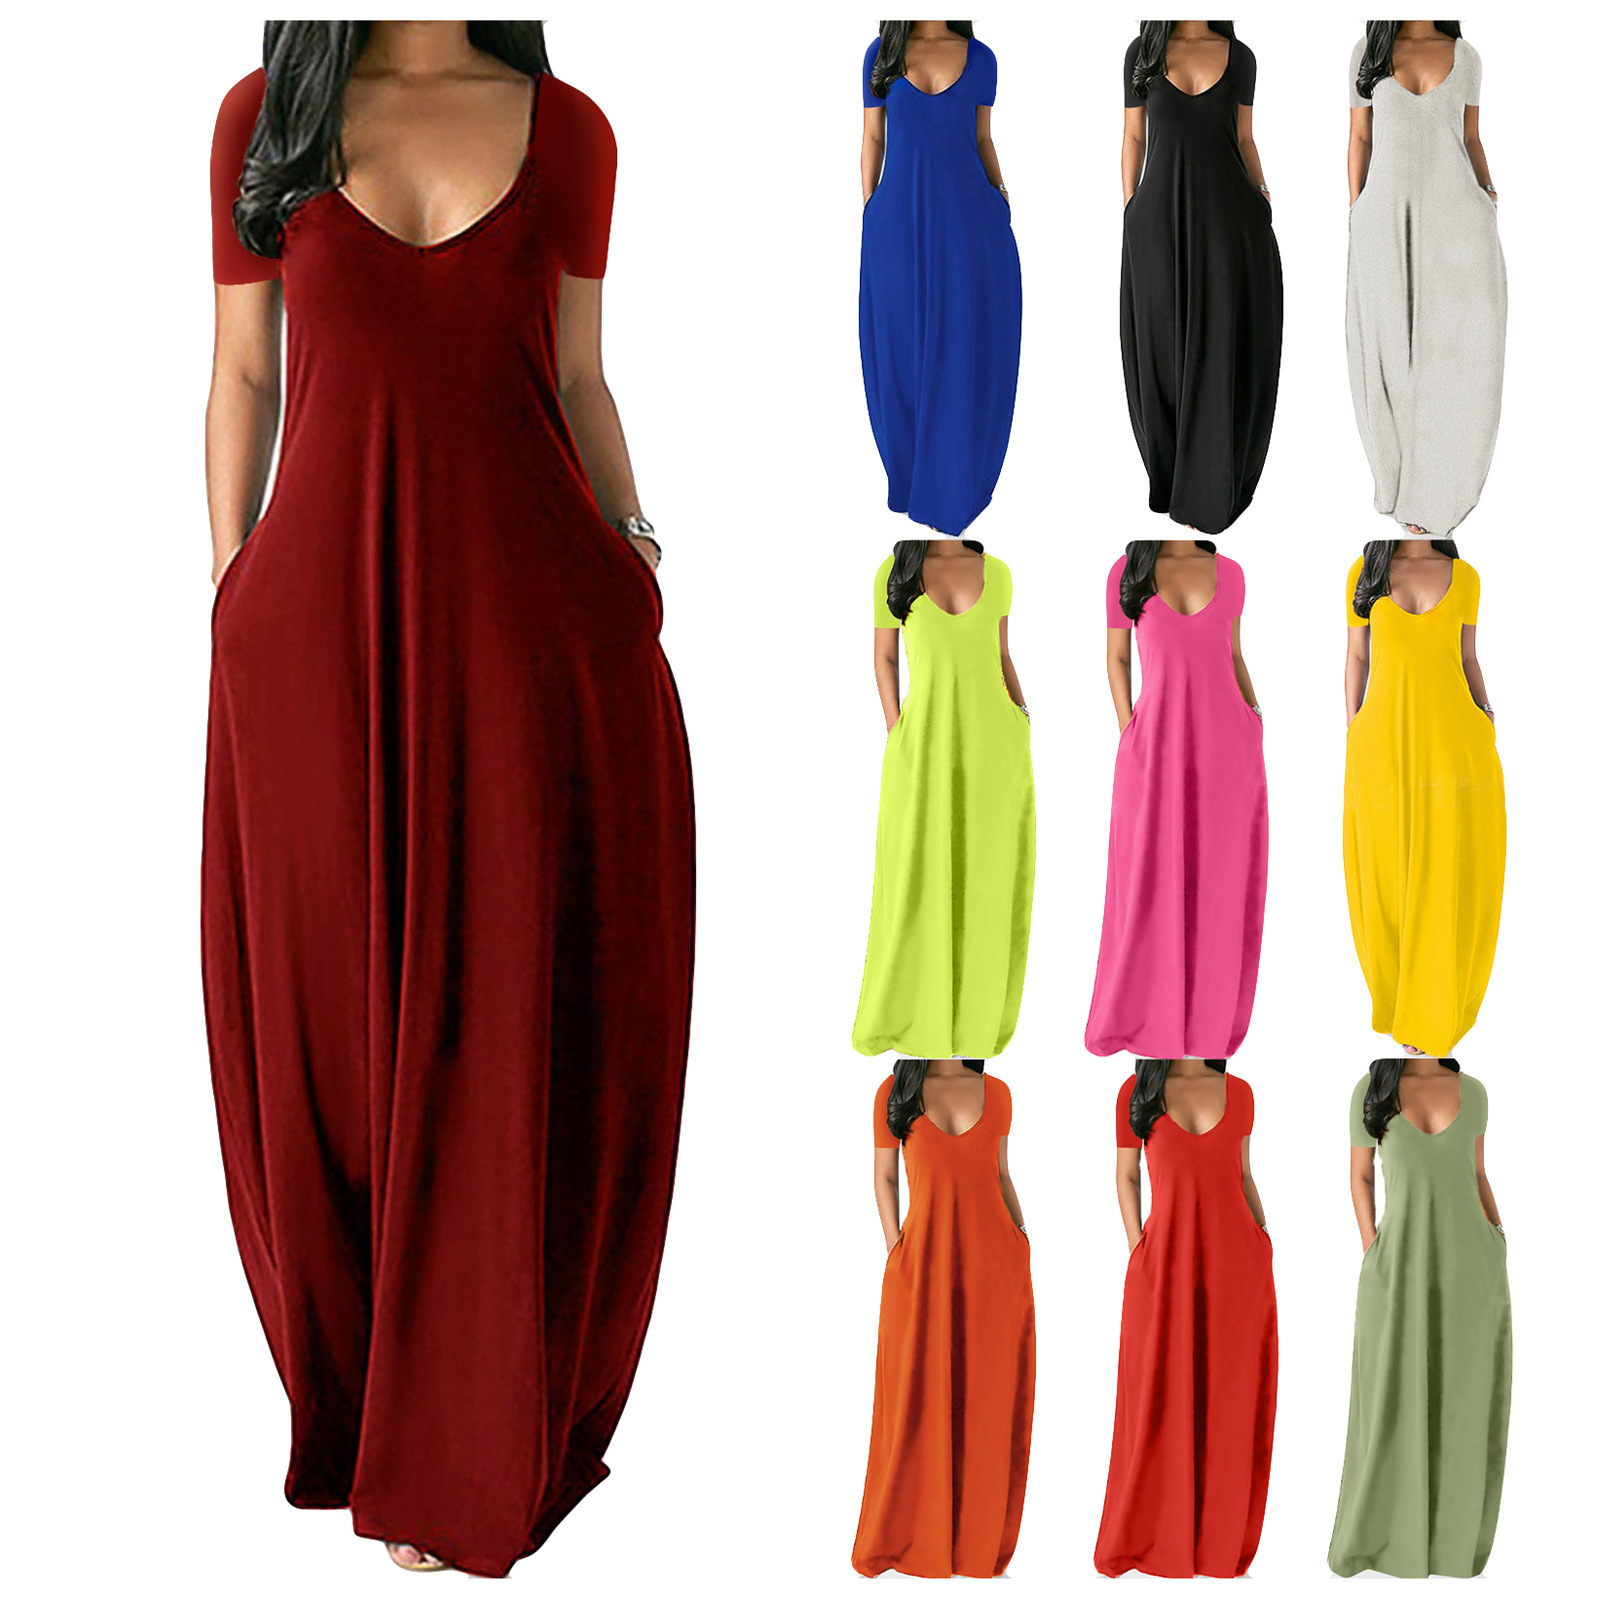 2023 European American Summer New Amazon Hot Sale plus Size Women's Solid Color Sexy Deep V Short Sleeve Maxi Dress with Pockets